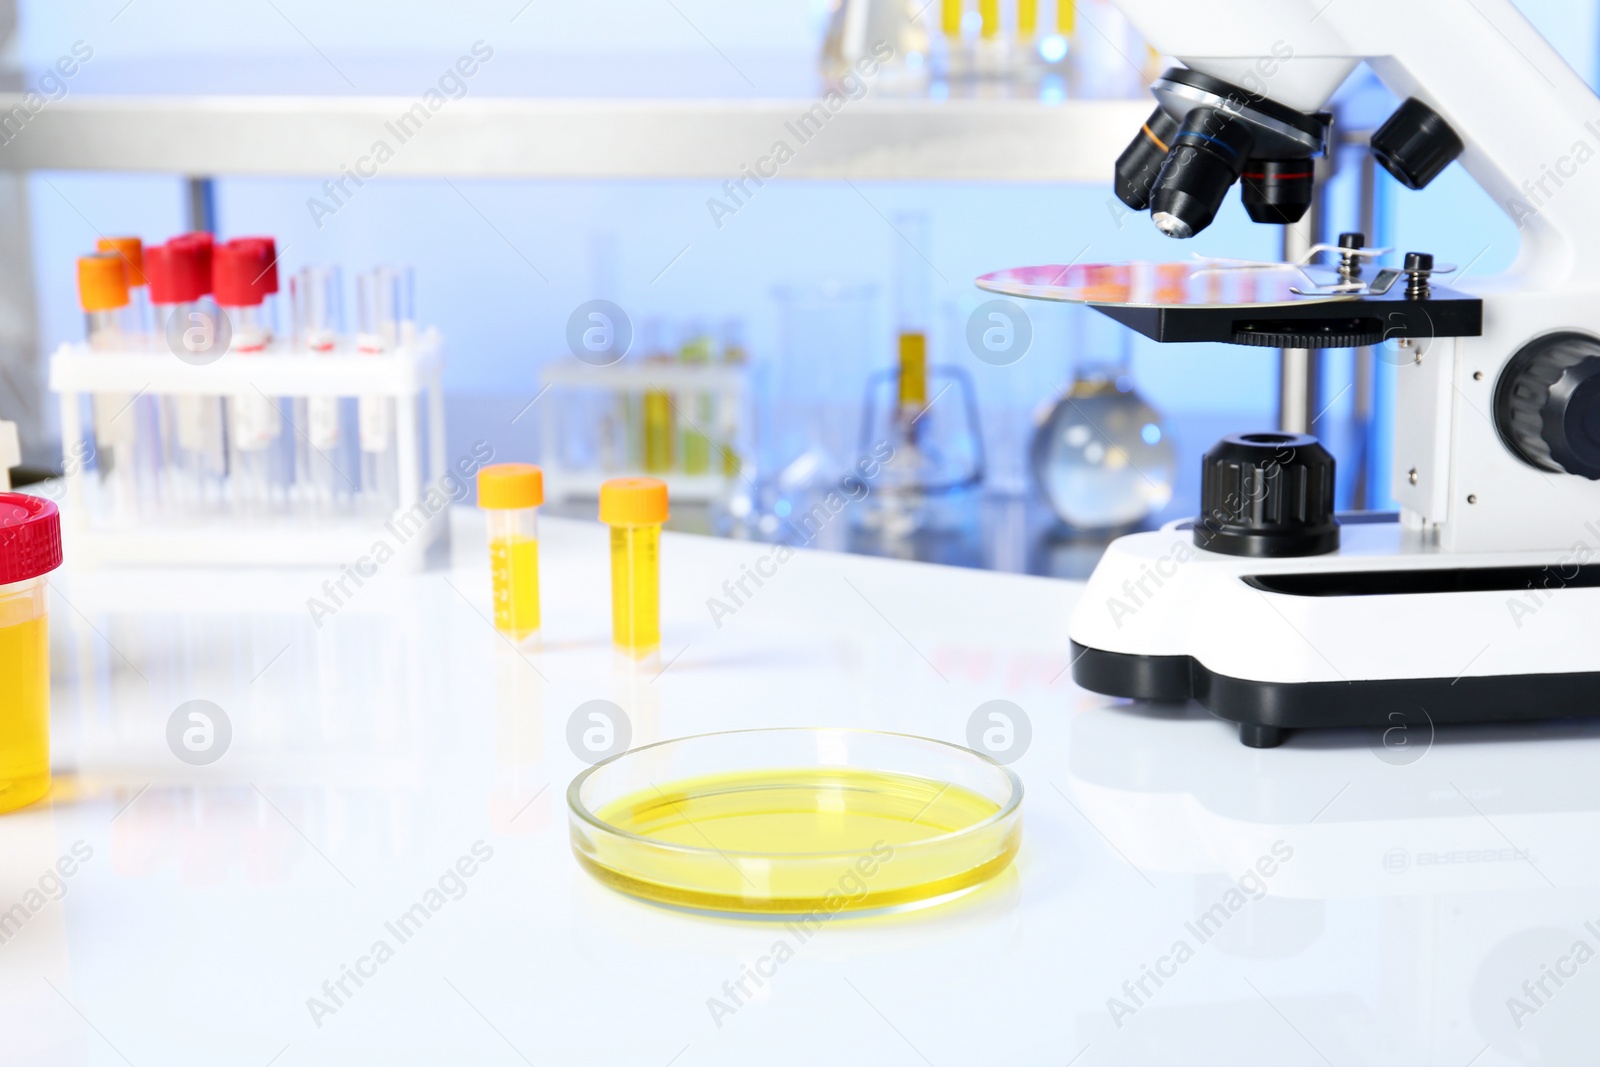 Photo of Petri dish with urine sample for analysis and microscope on table in laboratory